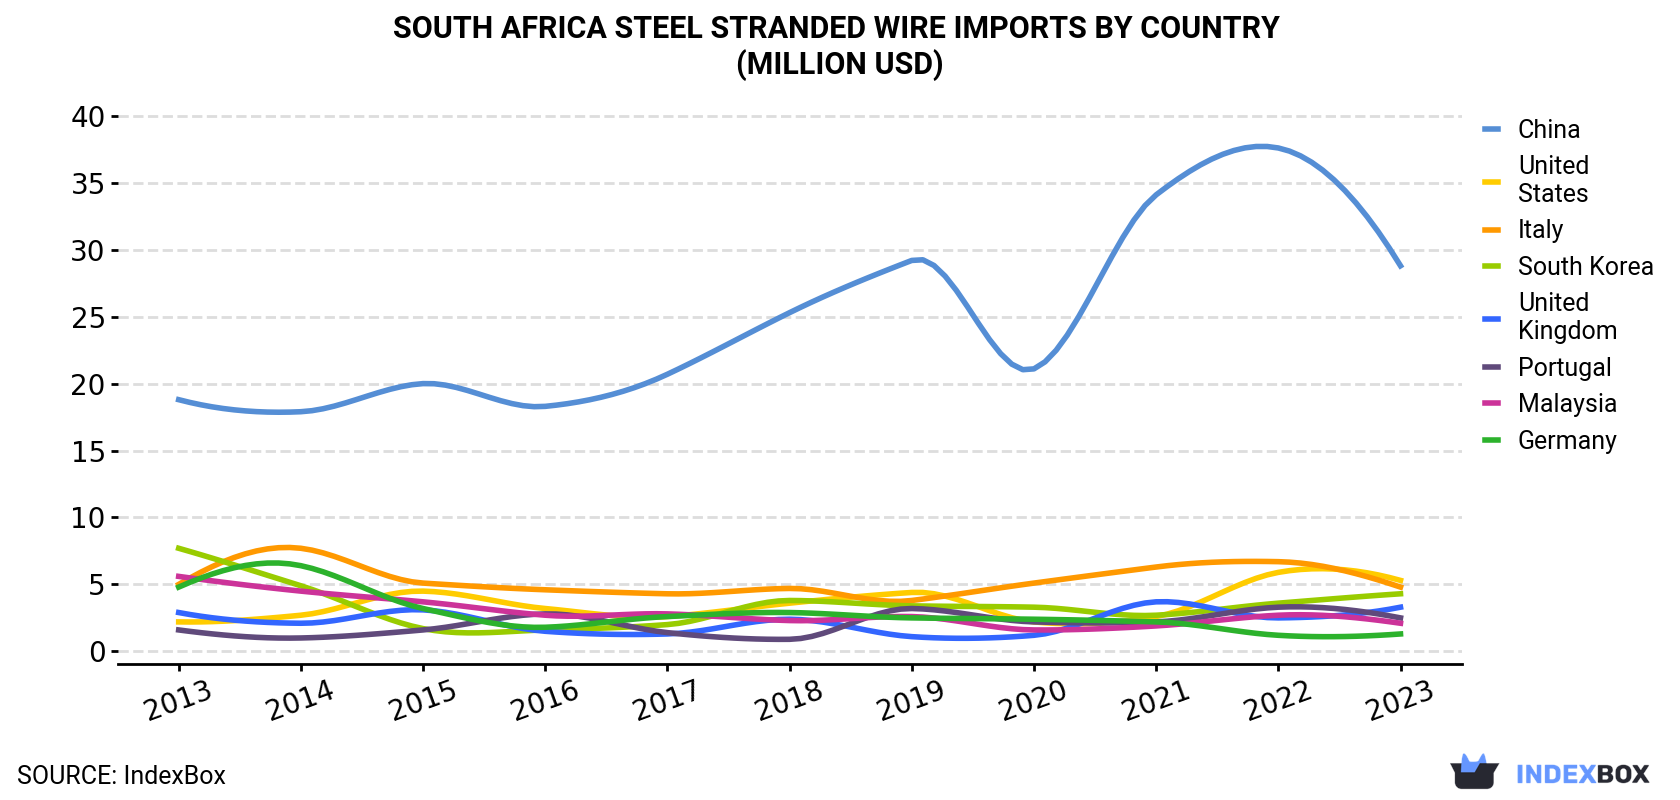 South Africa Steel Stranded Wire Imports By Country (Million USD)